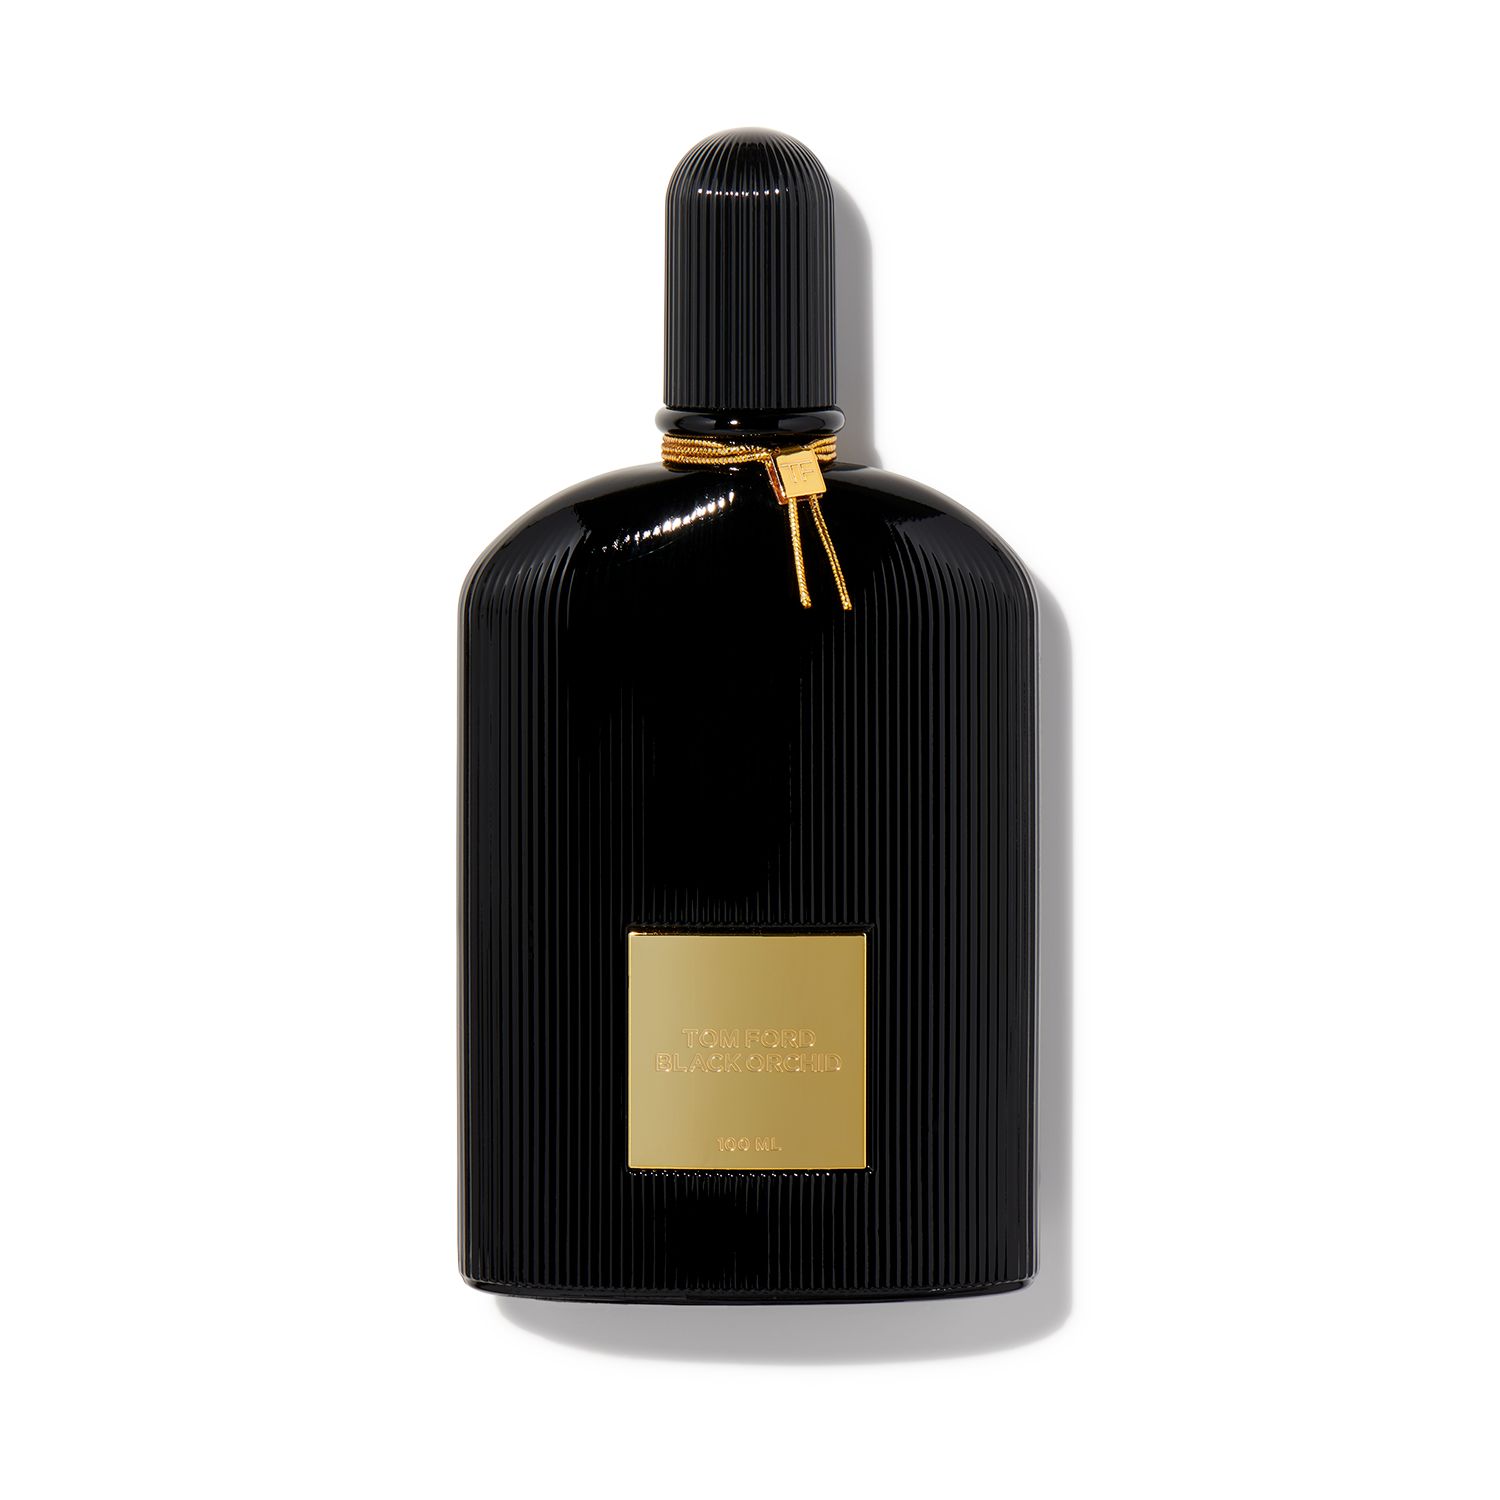 Score Black Orchid Tom Ford at Scentbird for $16.95